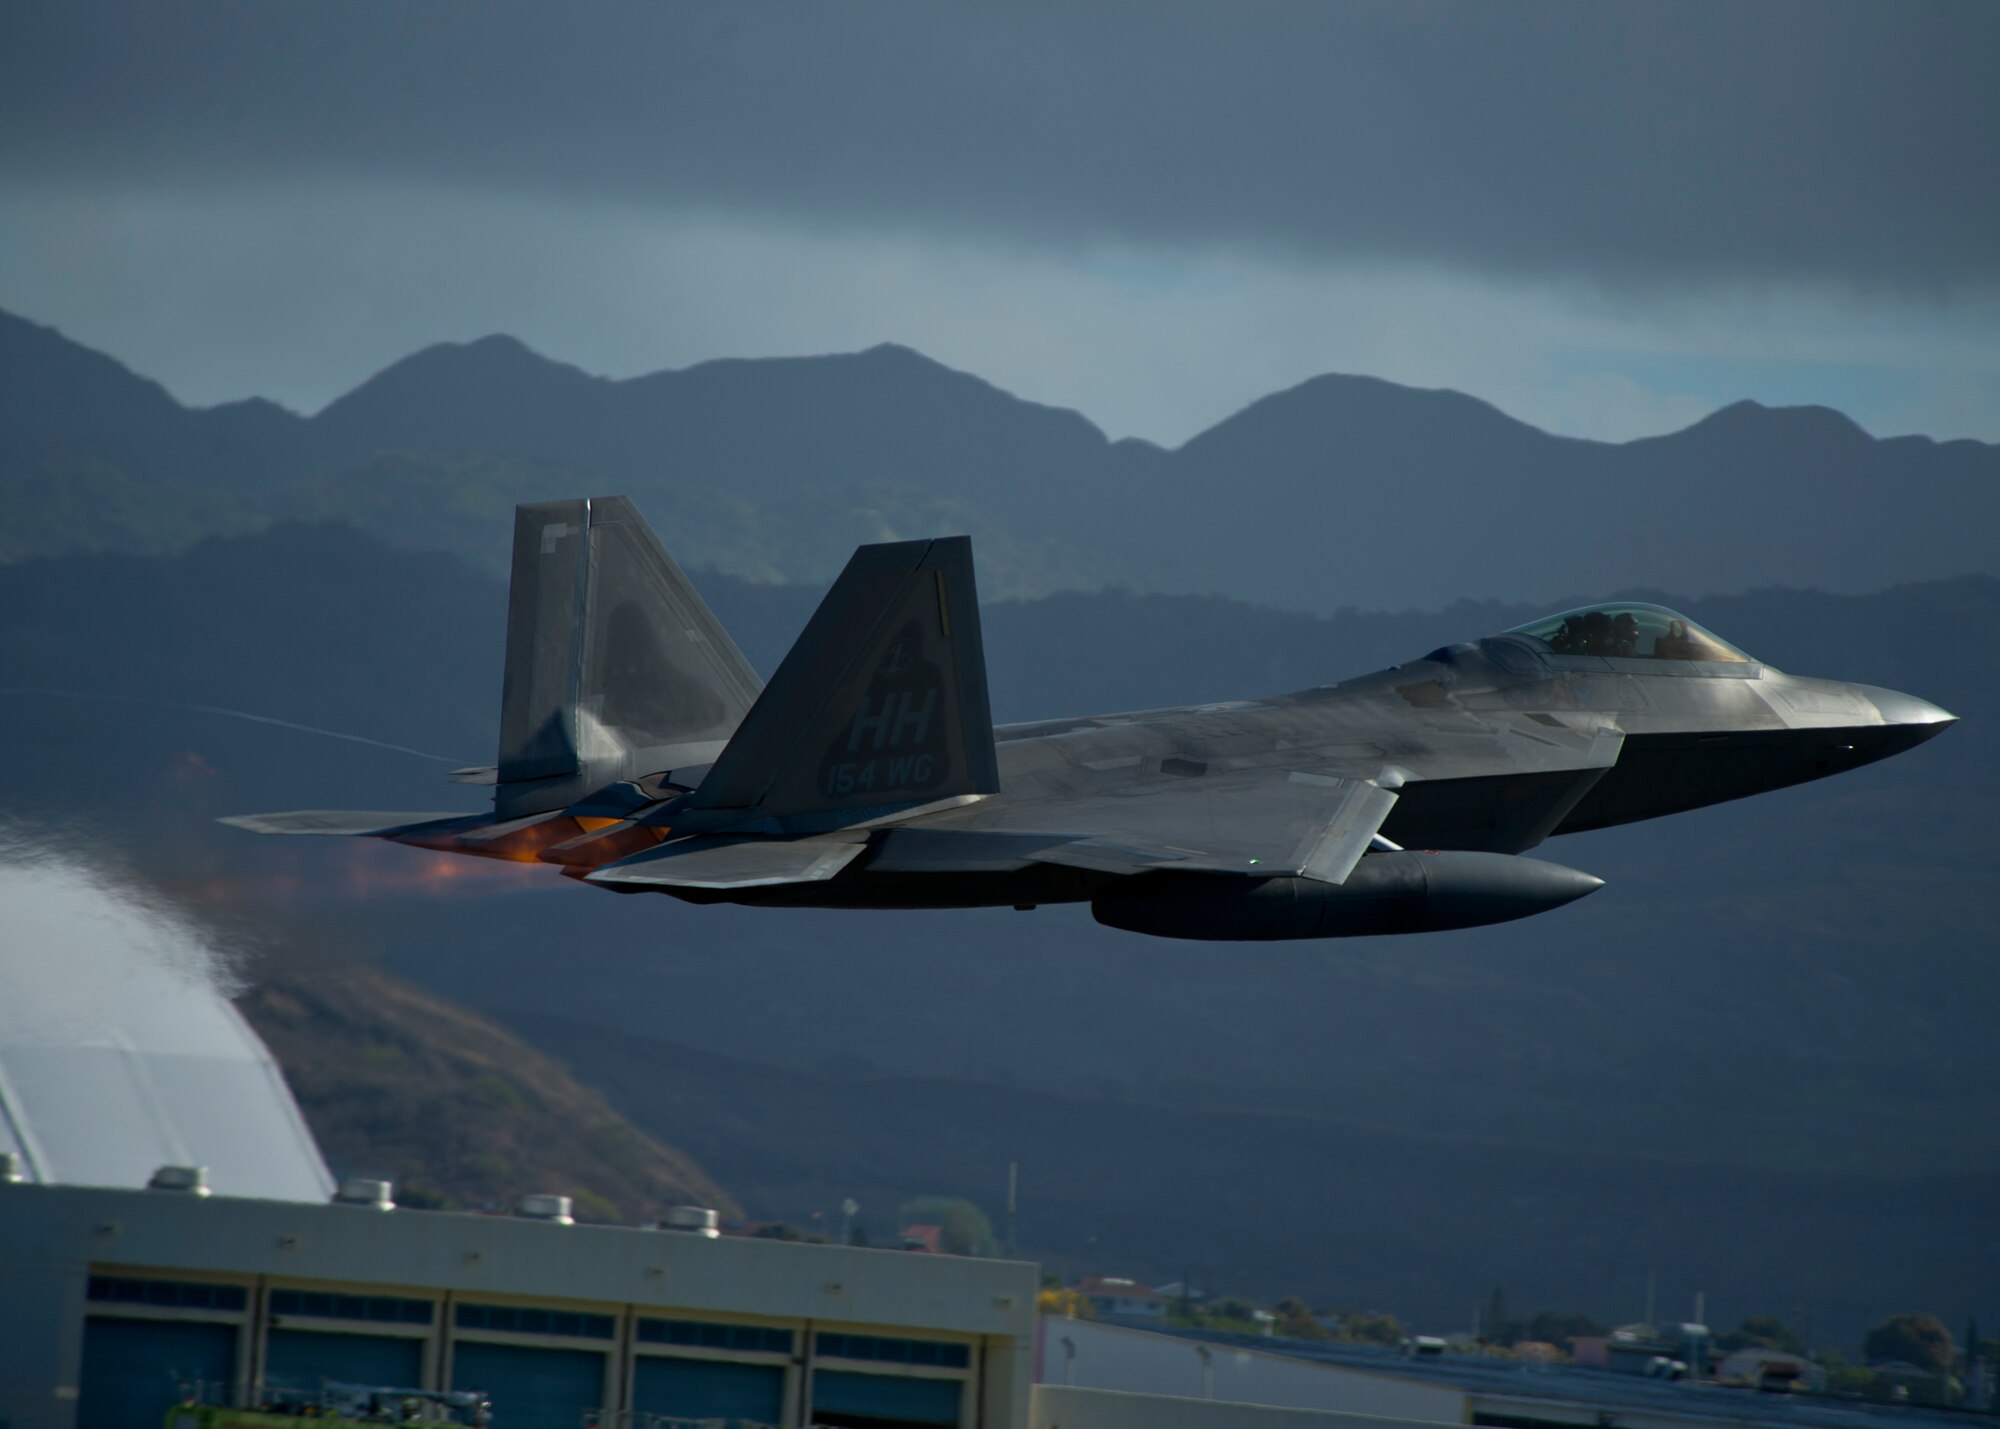 A United States Air Force F-22 Raptor, from the Hawaiian Raptors, takes off from Joint Base Pearl Harbor-Hickam, Hawaii, April 20, 2015. The F-22 Raptor has a range of 1,600 nautical miles with the two external wing fuel tanks attached. (U.S. Air Force photo by Tech. Sgt. Aaron Oelrich/Released)   